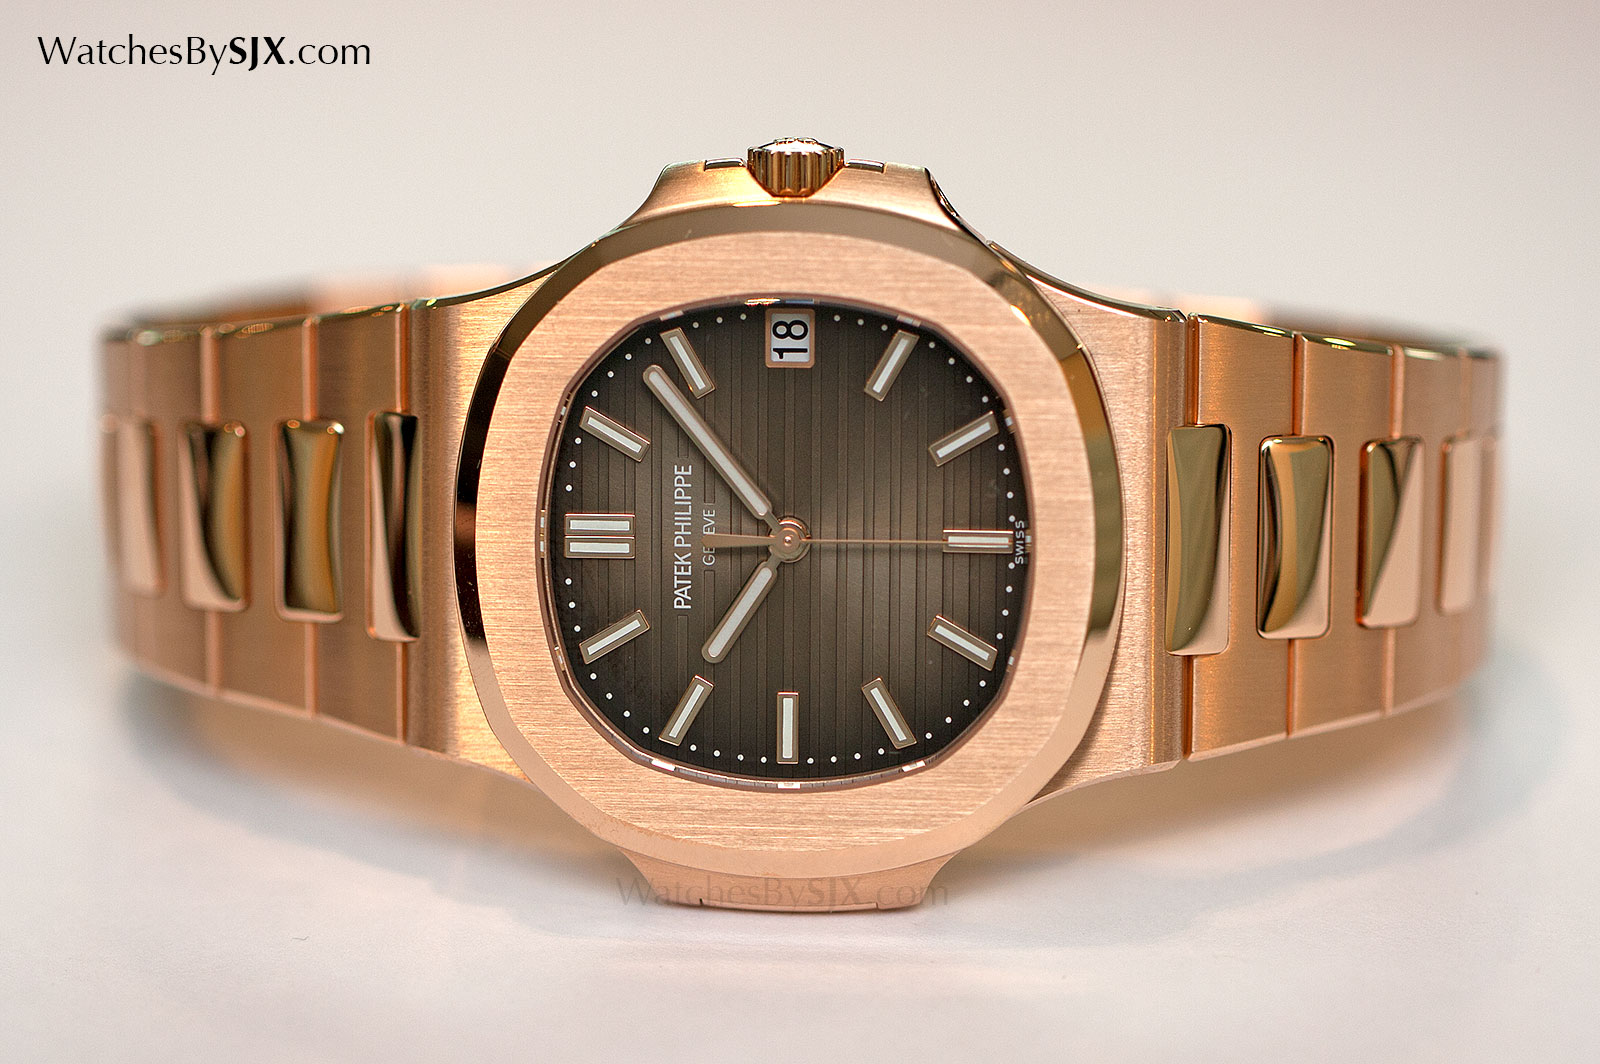 At Baselworld Patek Philippe unveiled the Nautilus Ref. 5711/1R, the ...